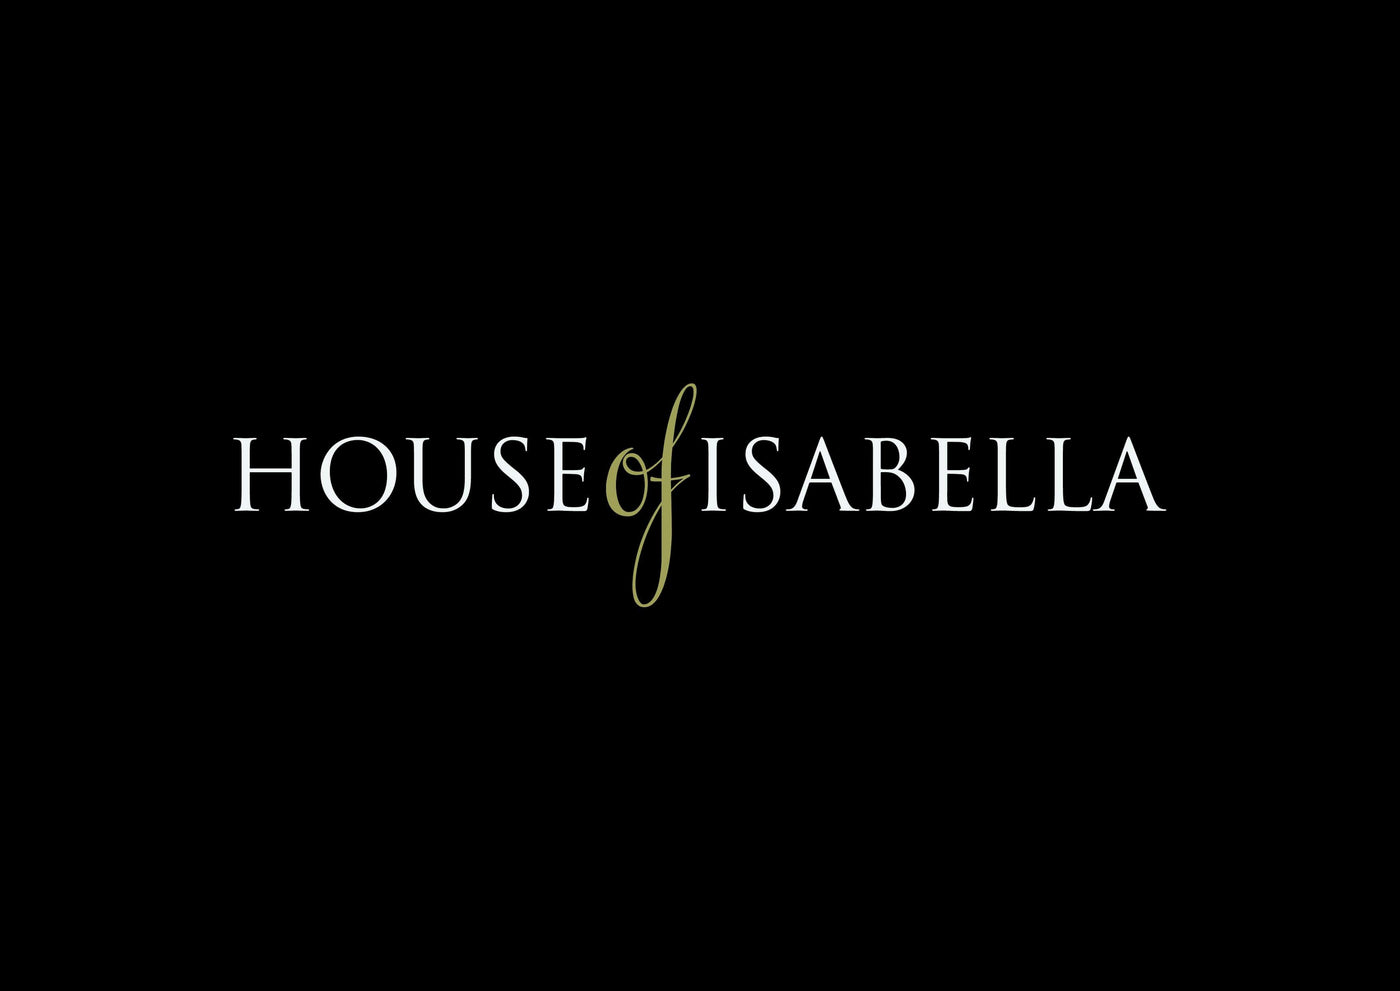 House of Isabella Gift Cards - House of Isabella UK